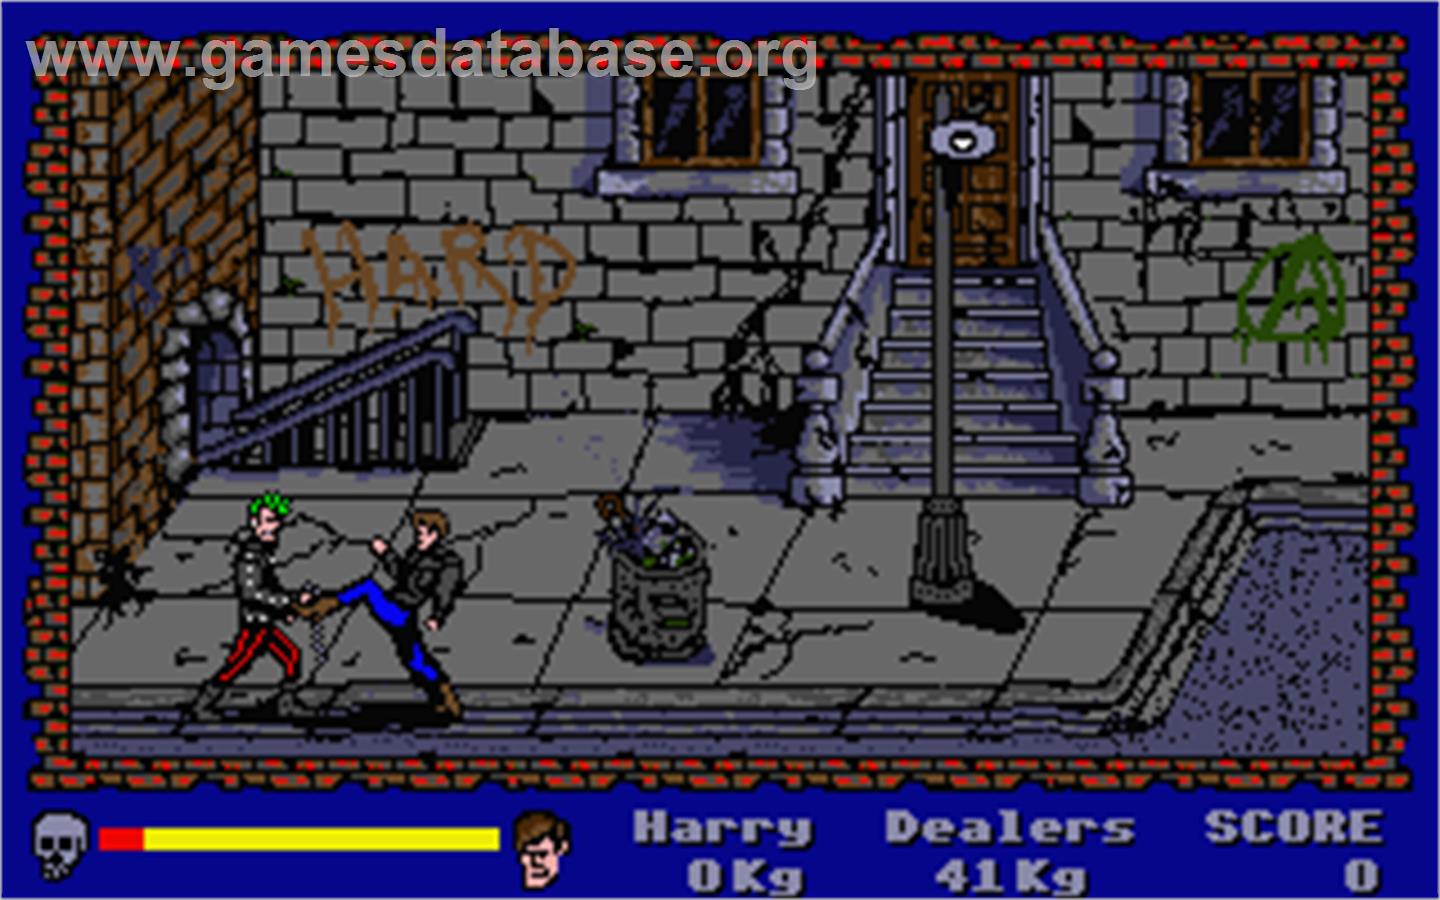 Operation: Cleanstreets - Atari ST - Artwork - In Game